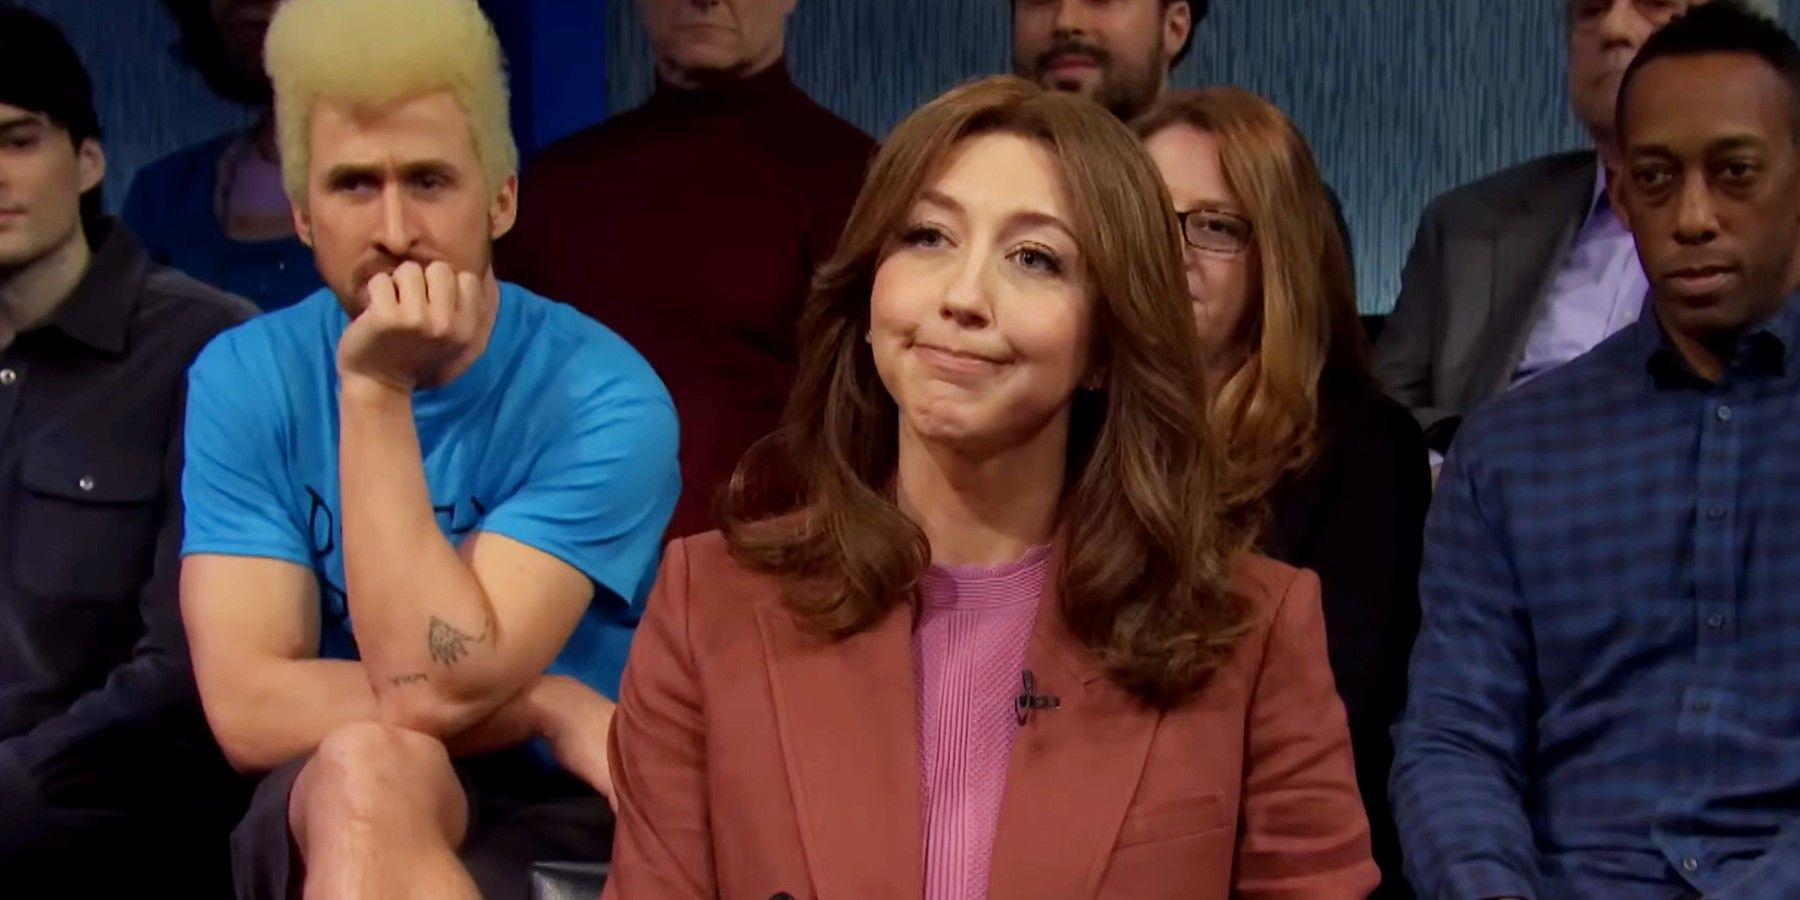 Heidi Gardner as a host while Ryan Gosling is dressed as Beevus in SNL's Beevus and Butthead skit